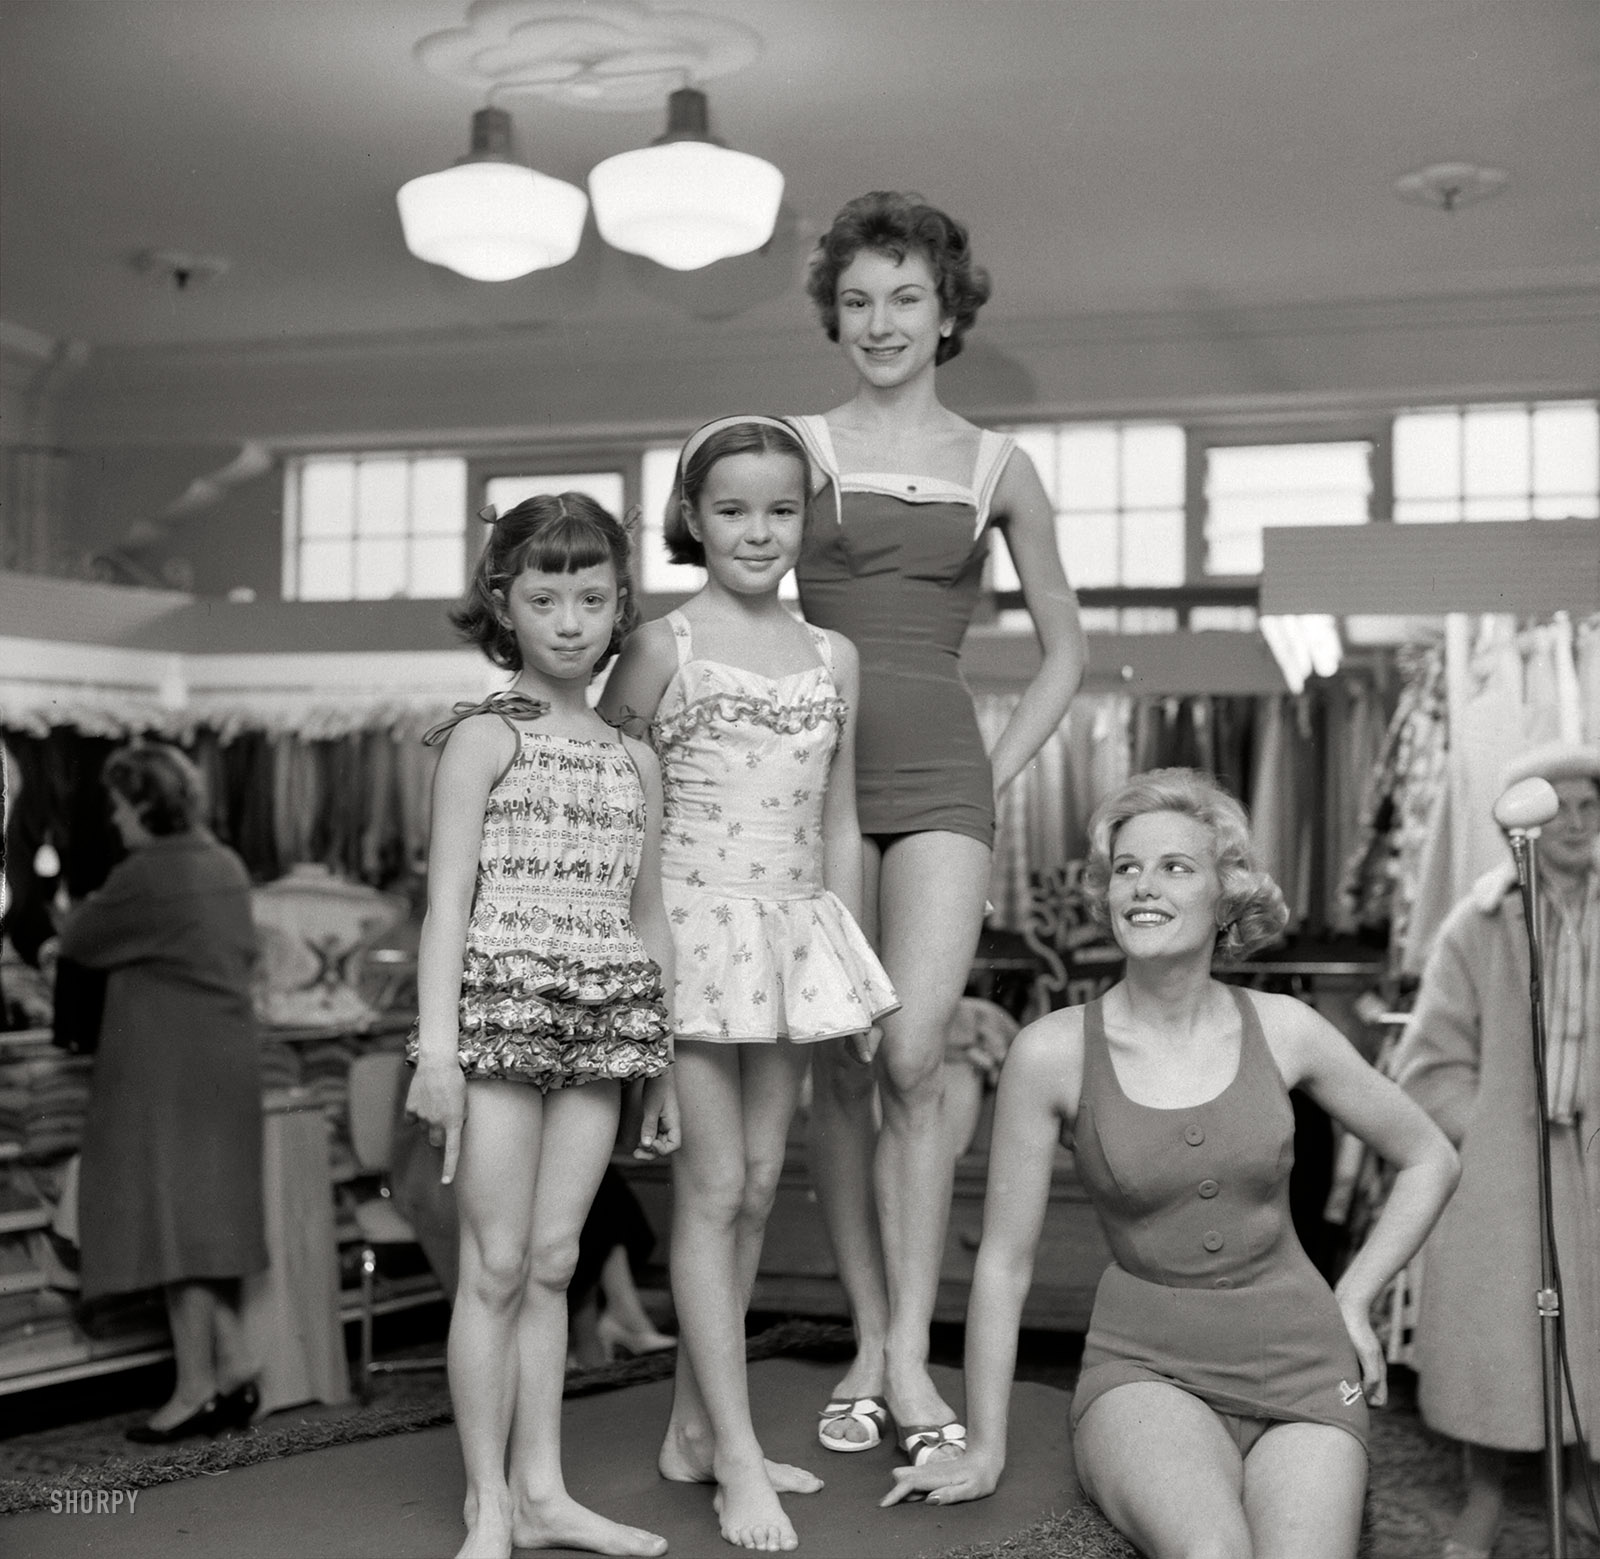 August 27, 1959. Wellington, New Zealand. "Swimsuit fashion show at James Smiths Ltd." Another picturesque scene from the mysterious parallel universe of the Southern Anglosphere. Evening Post photo. View full size.